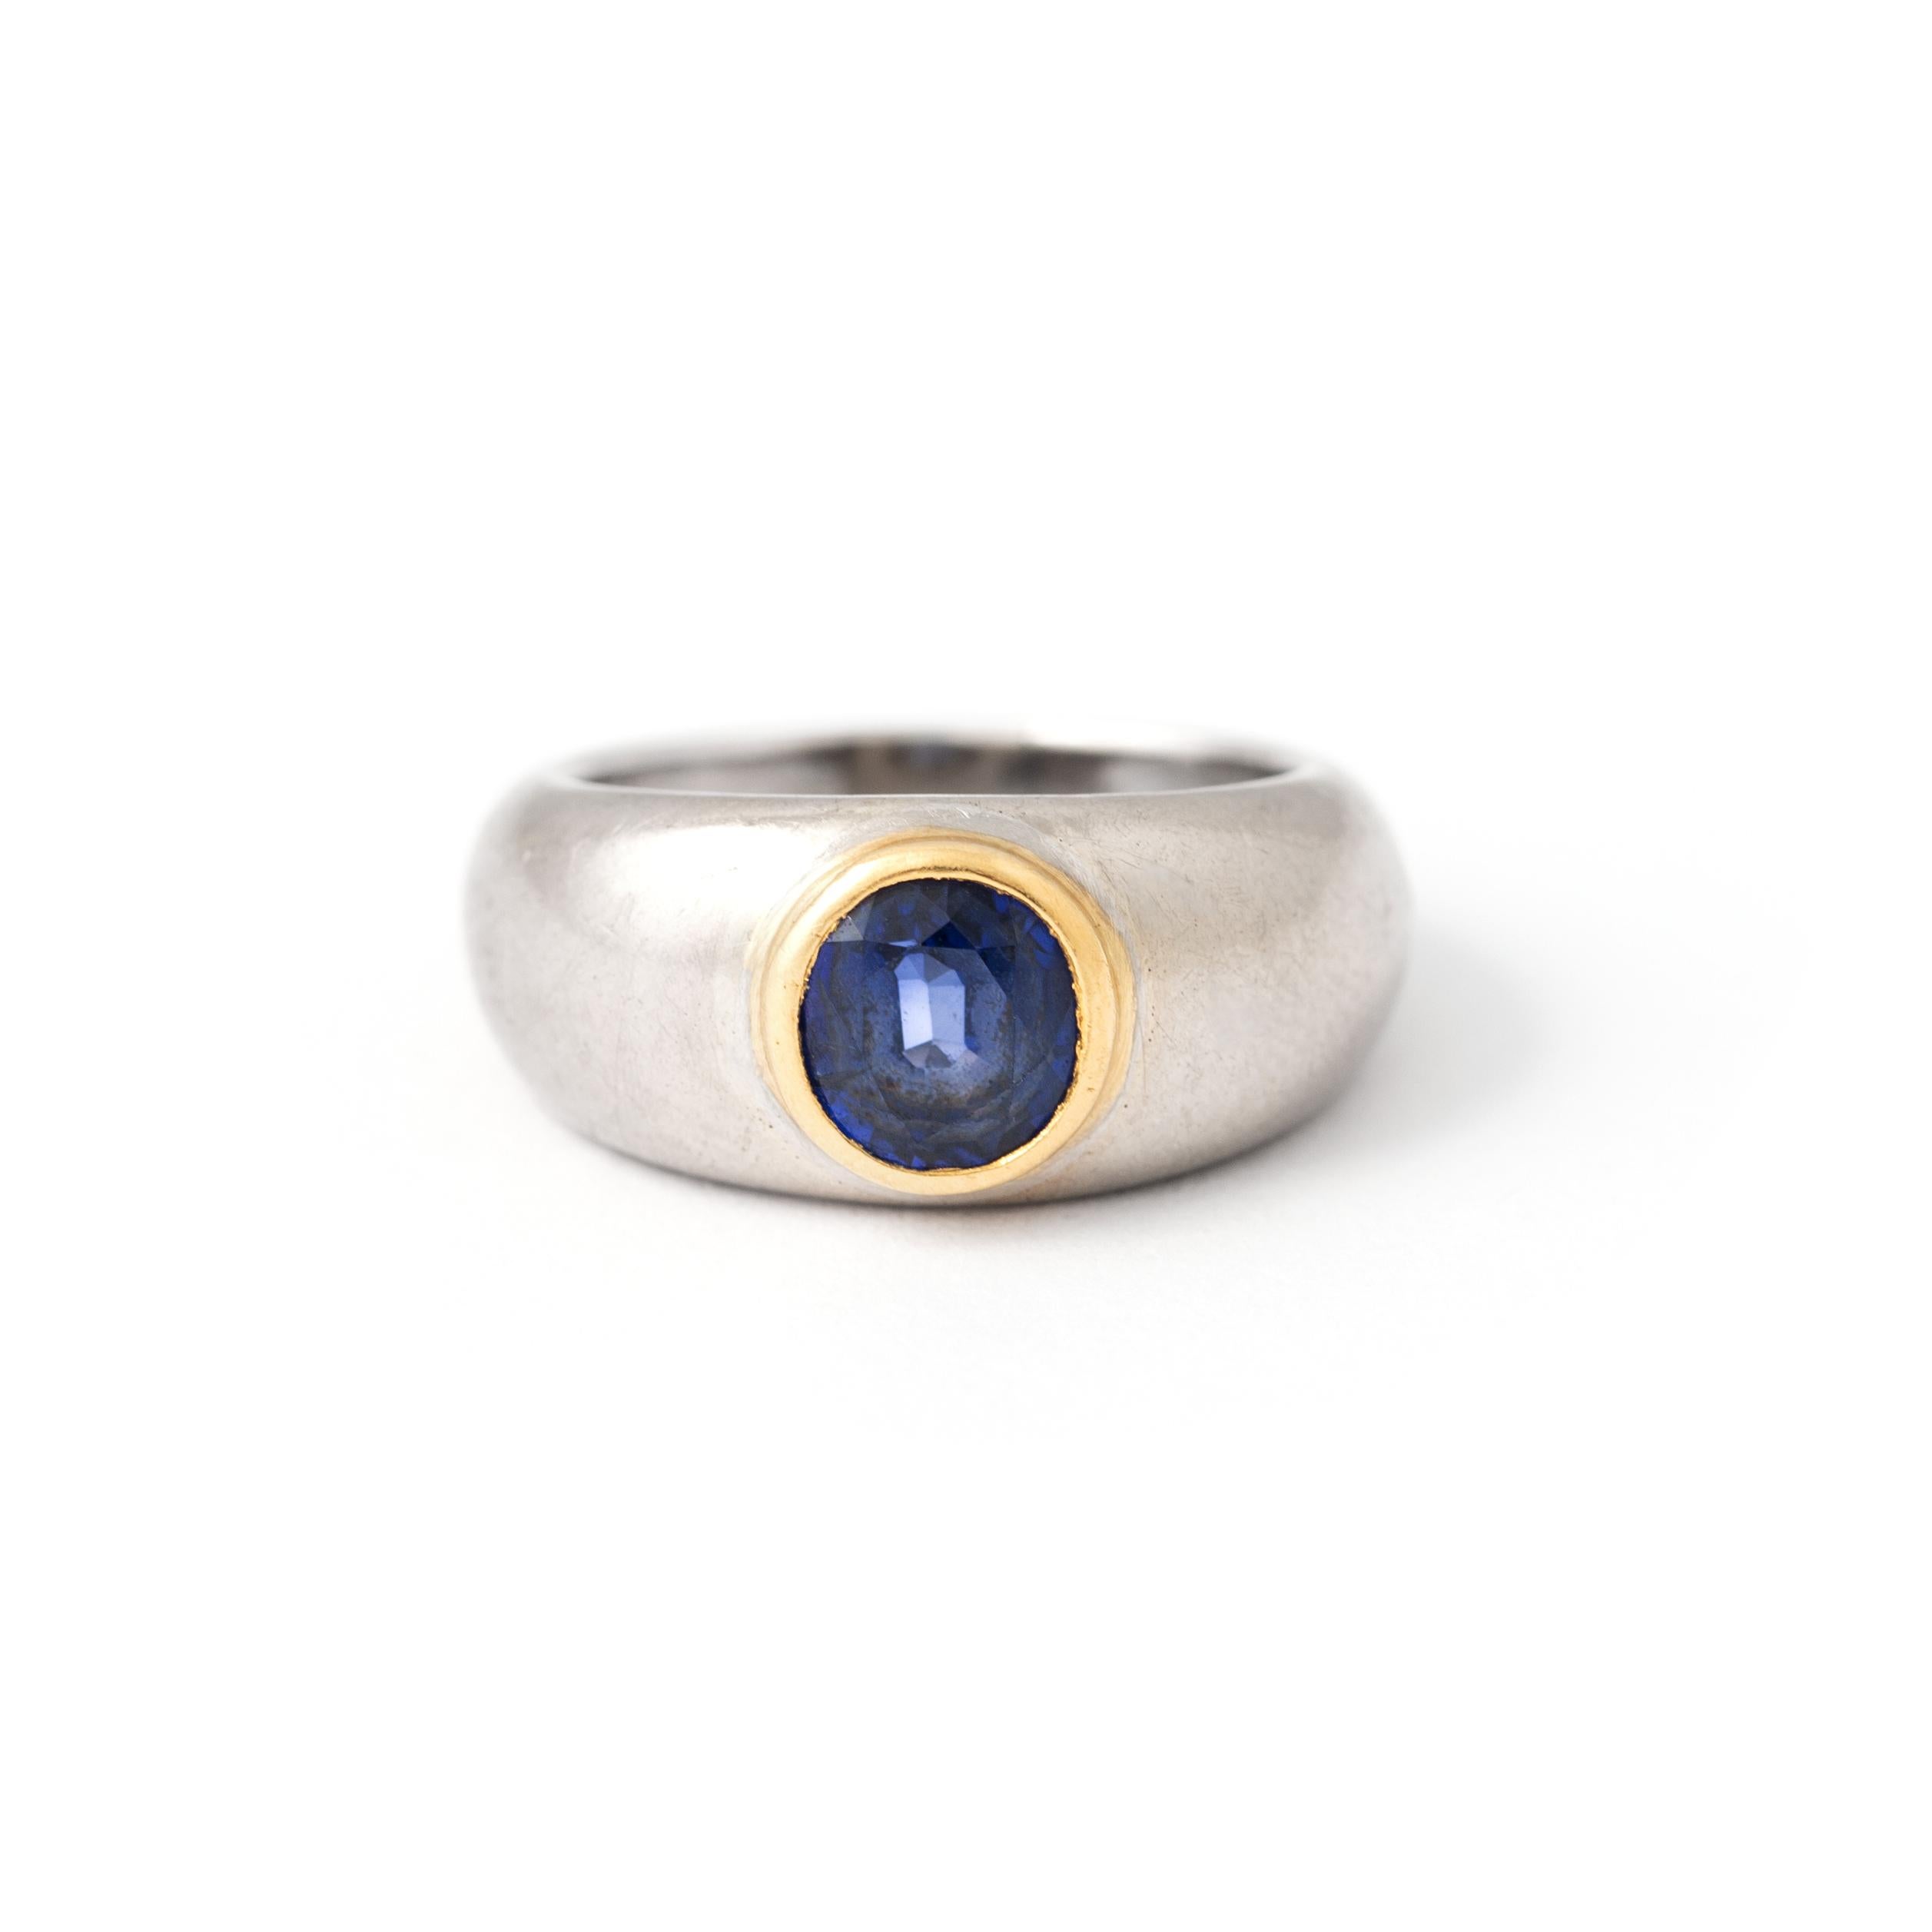 18K white gold ring centered by a round sapphire about 1.00 carat. 
Dimensions of the sapphire: 6.05 x 5.78 x 3.96 mm. 
Size: 43. 
Gross weight: 7.46 grams.